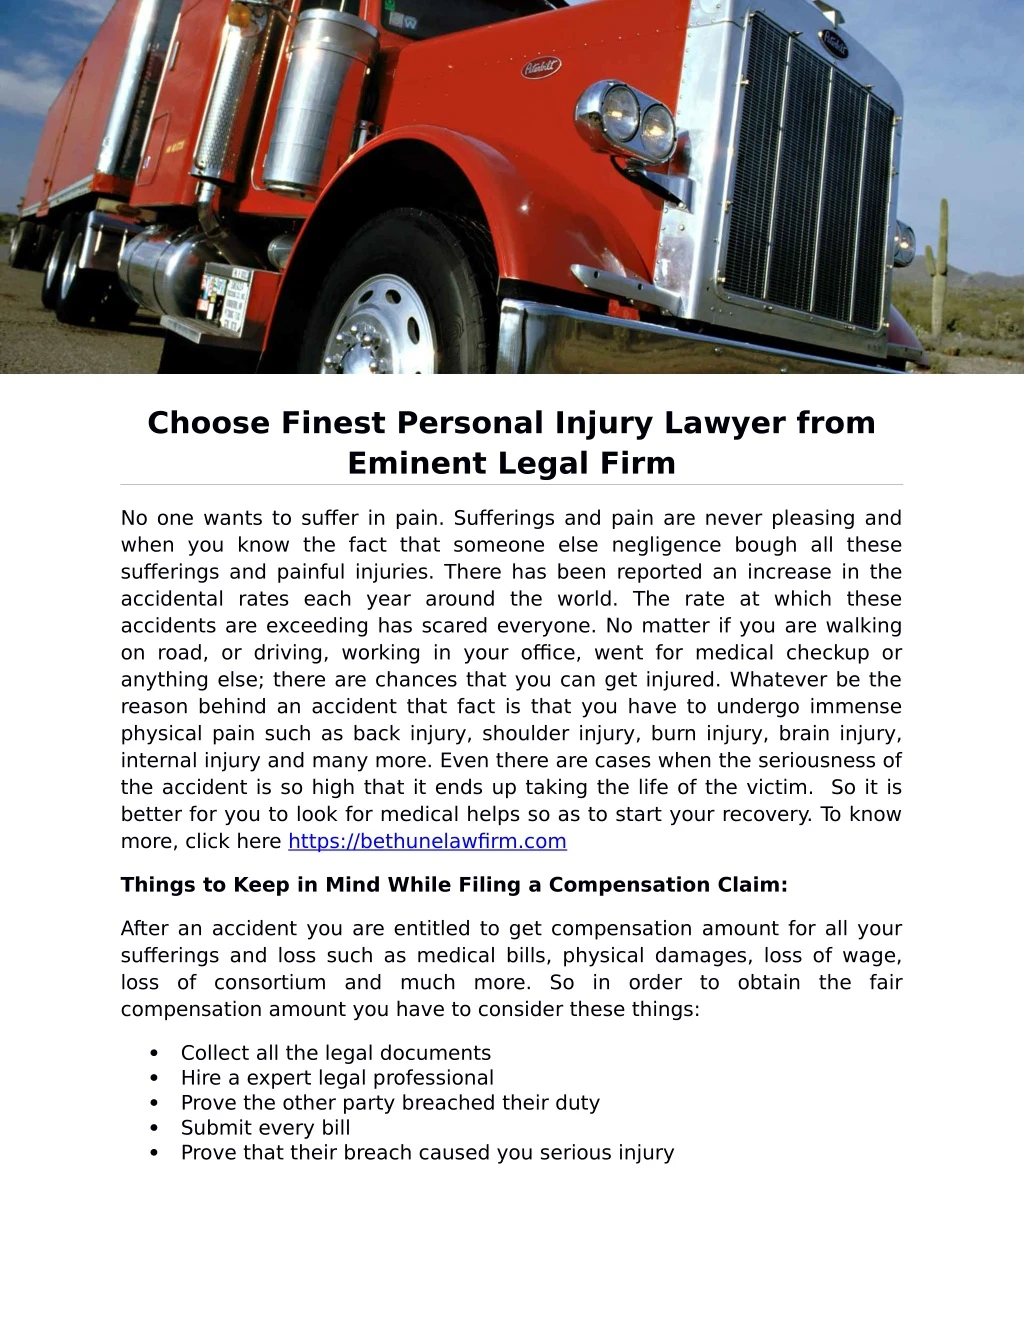 choose finest personal injury lawyer from eminent